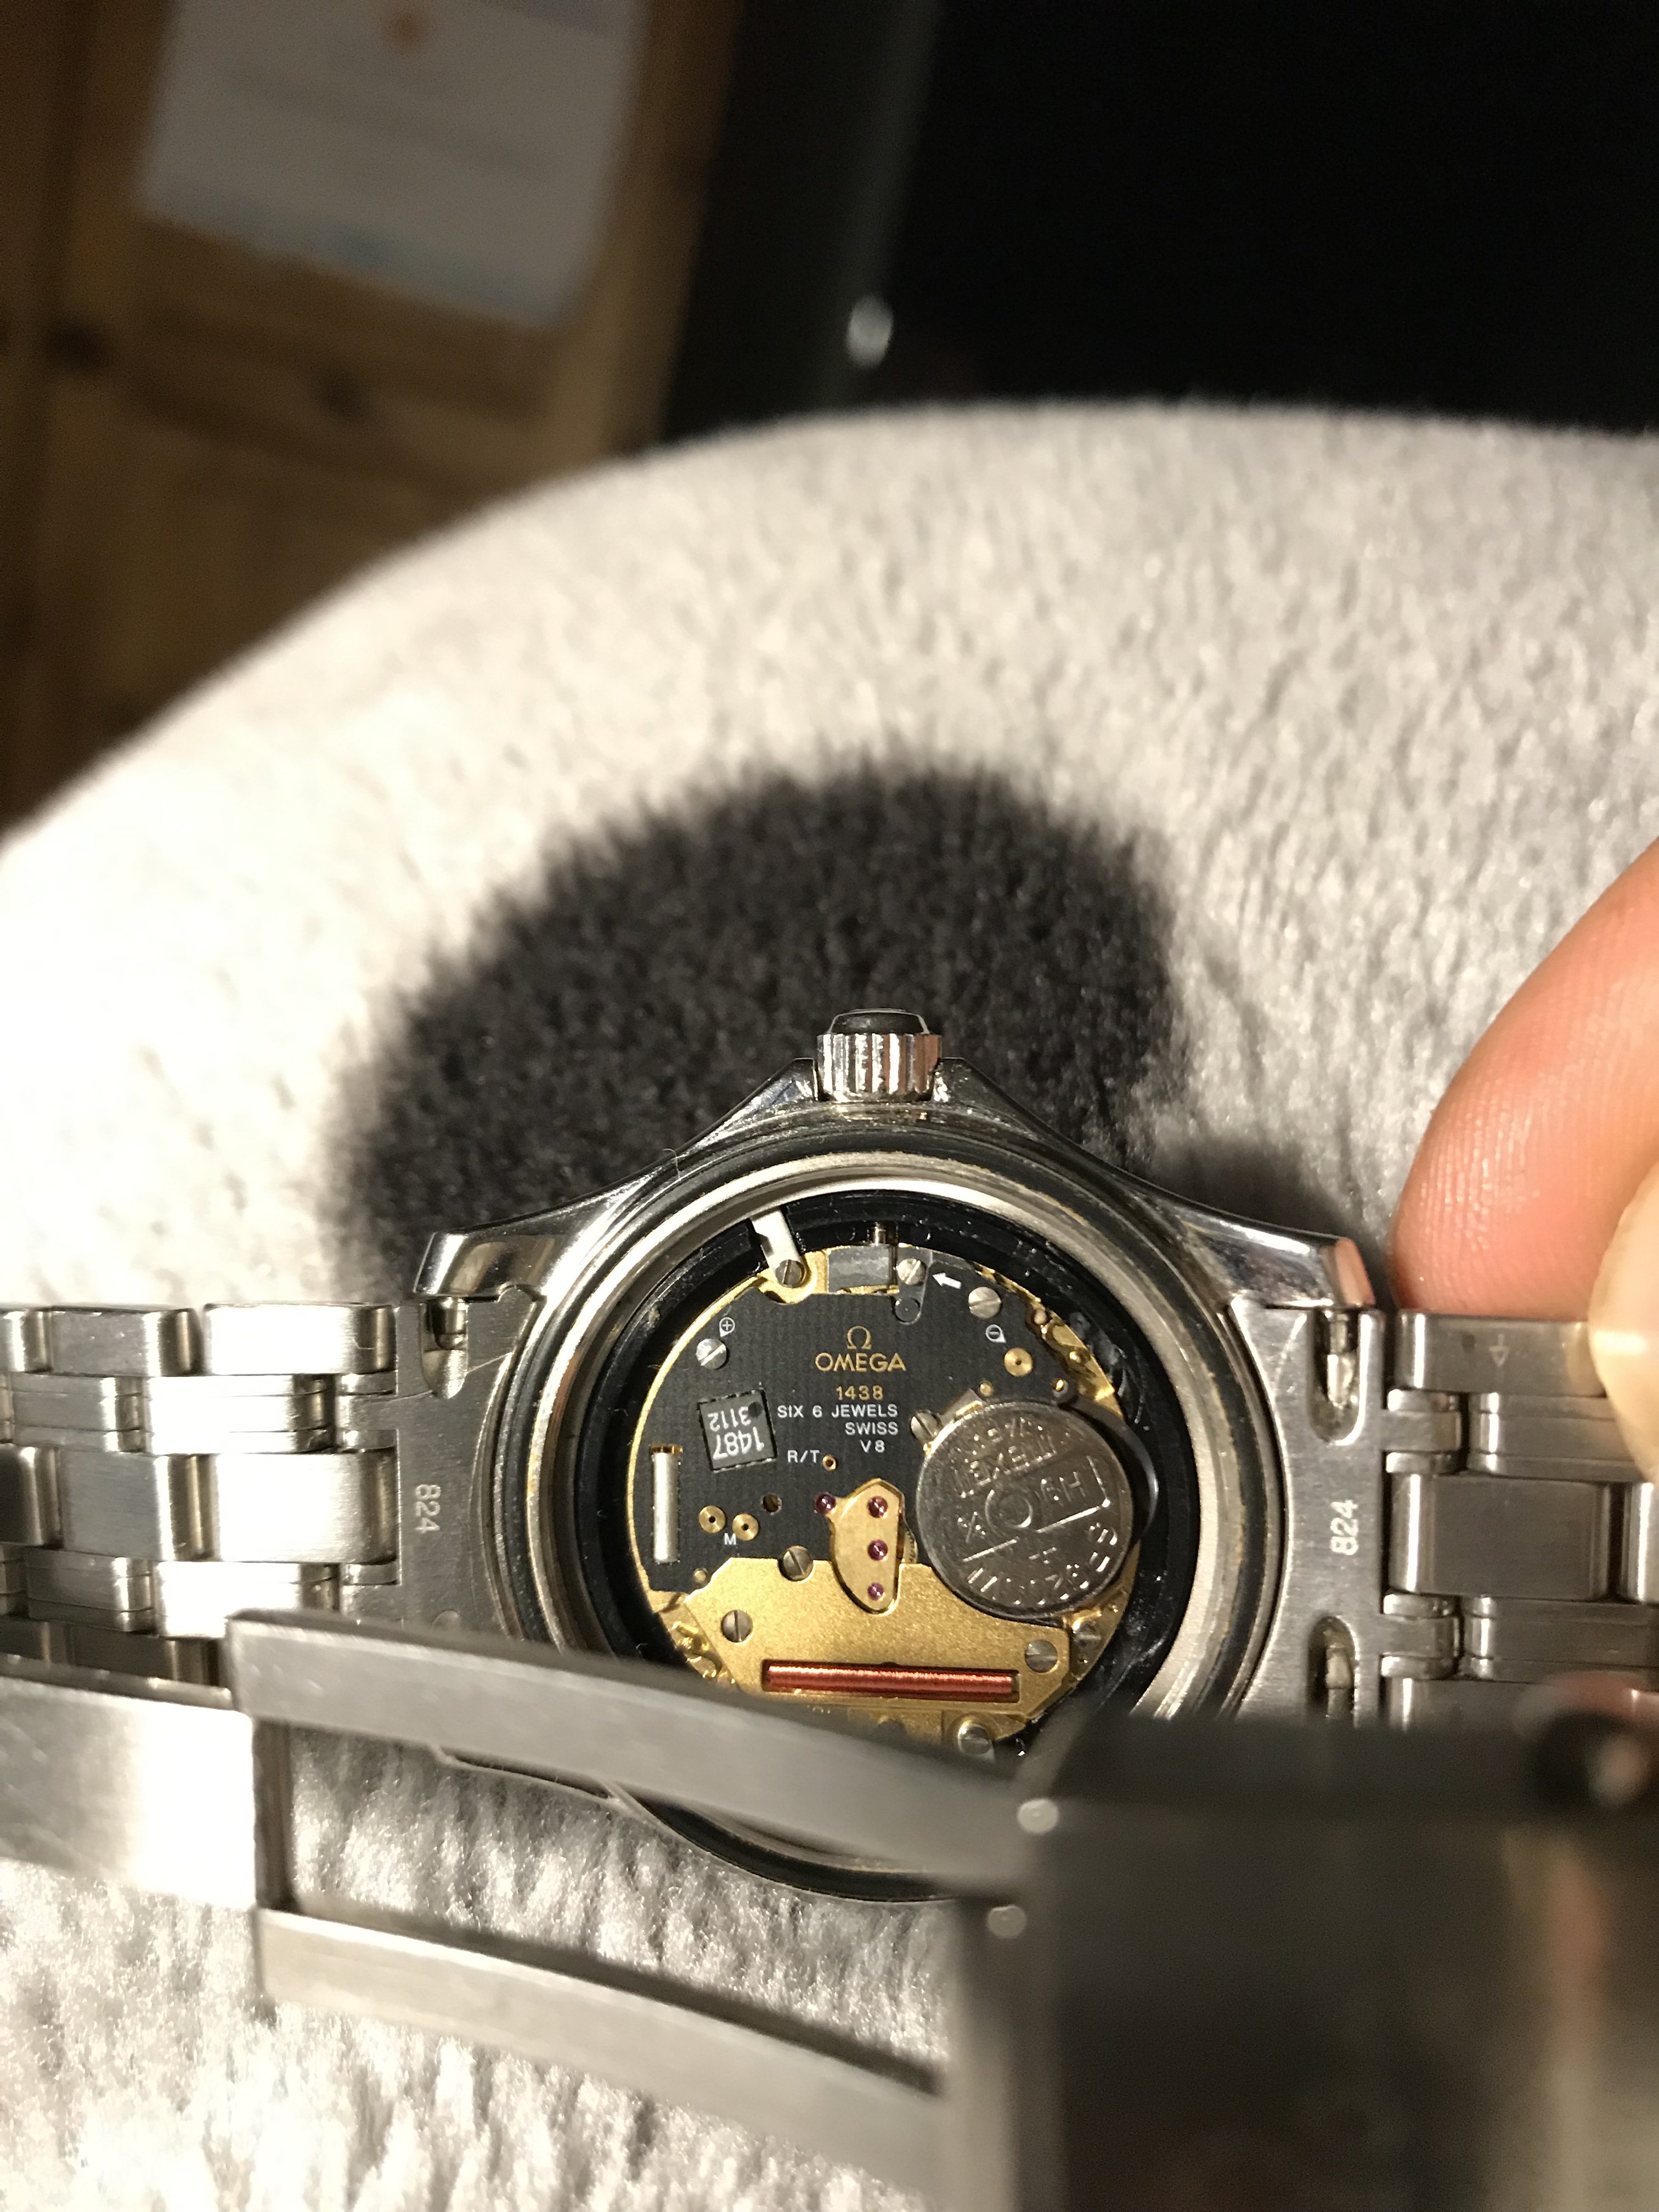 My Omega SMP 300m has a 1438 movement 